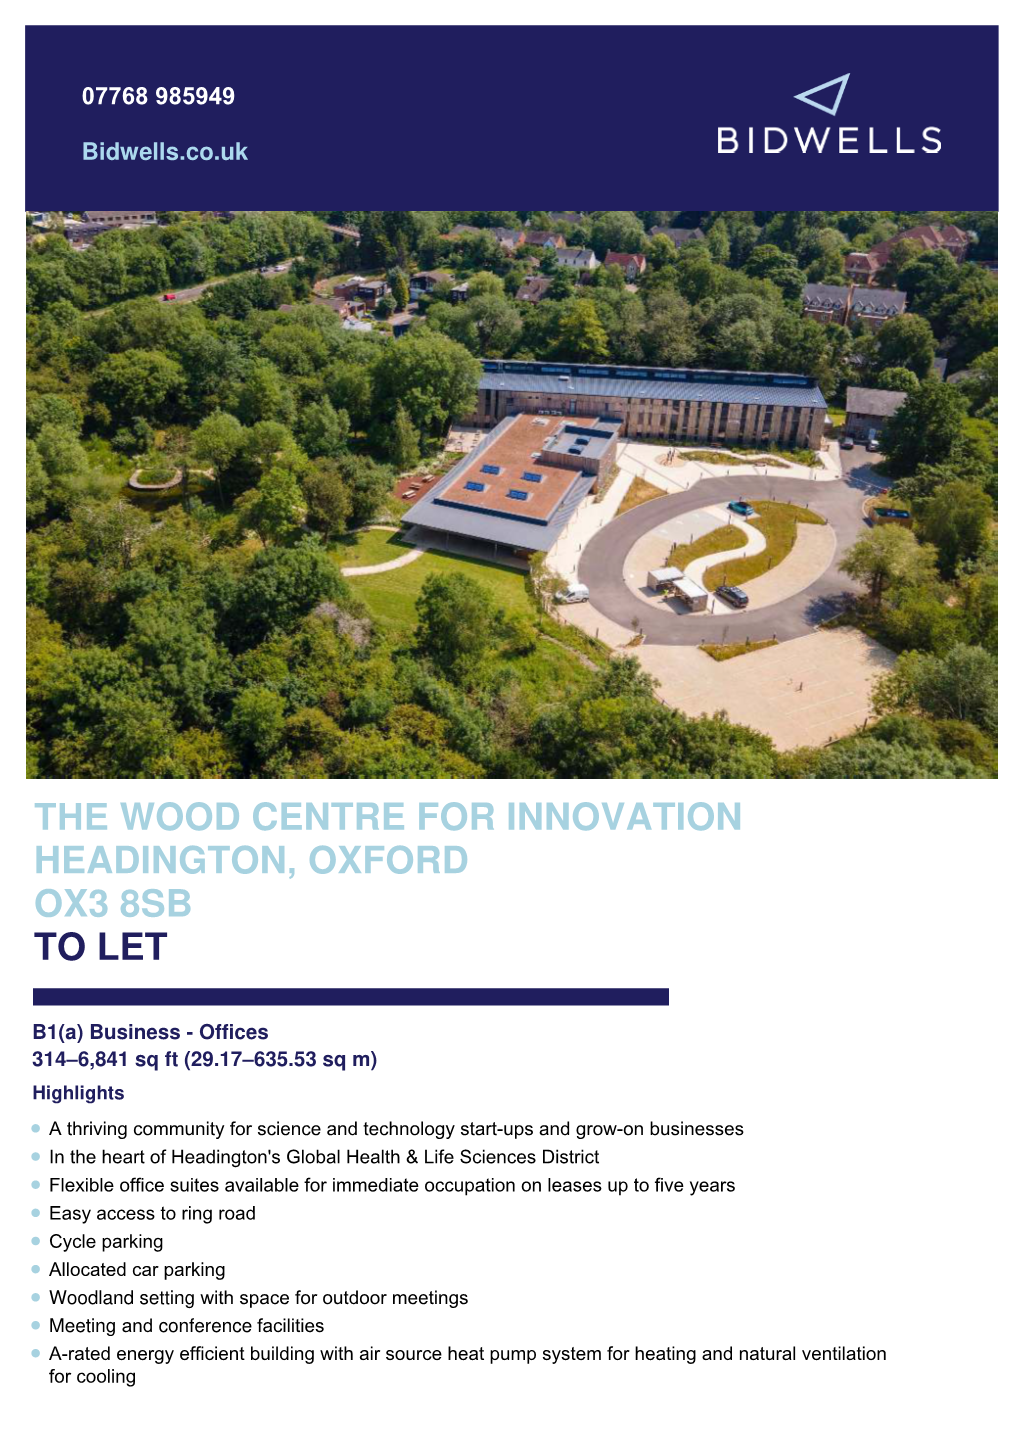 The Wood Centre for Innovation Headington, Oxford Ox3 8Sb to Let